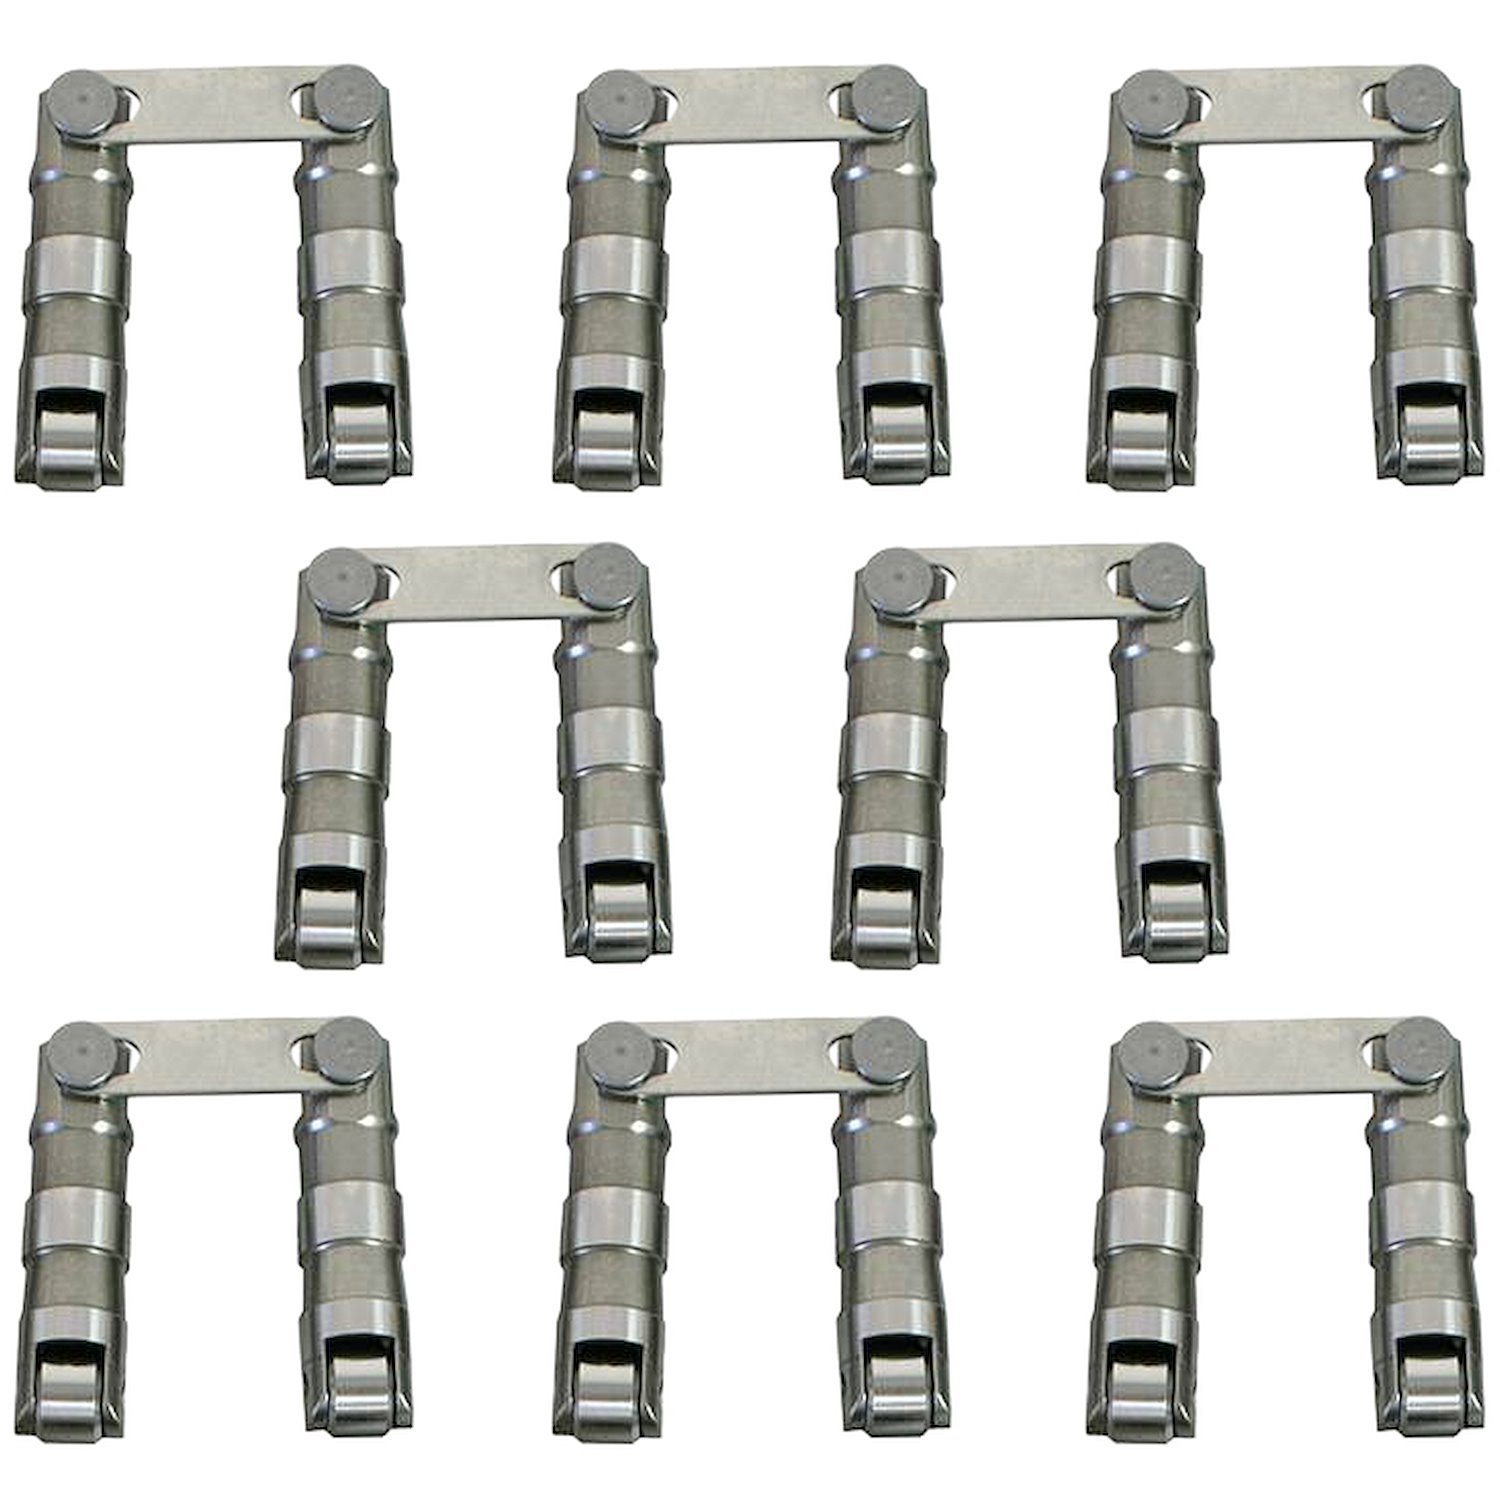 Max Effort Retro-Fit Hydraulic Roller Lifter Set Chevy 265-400